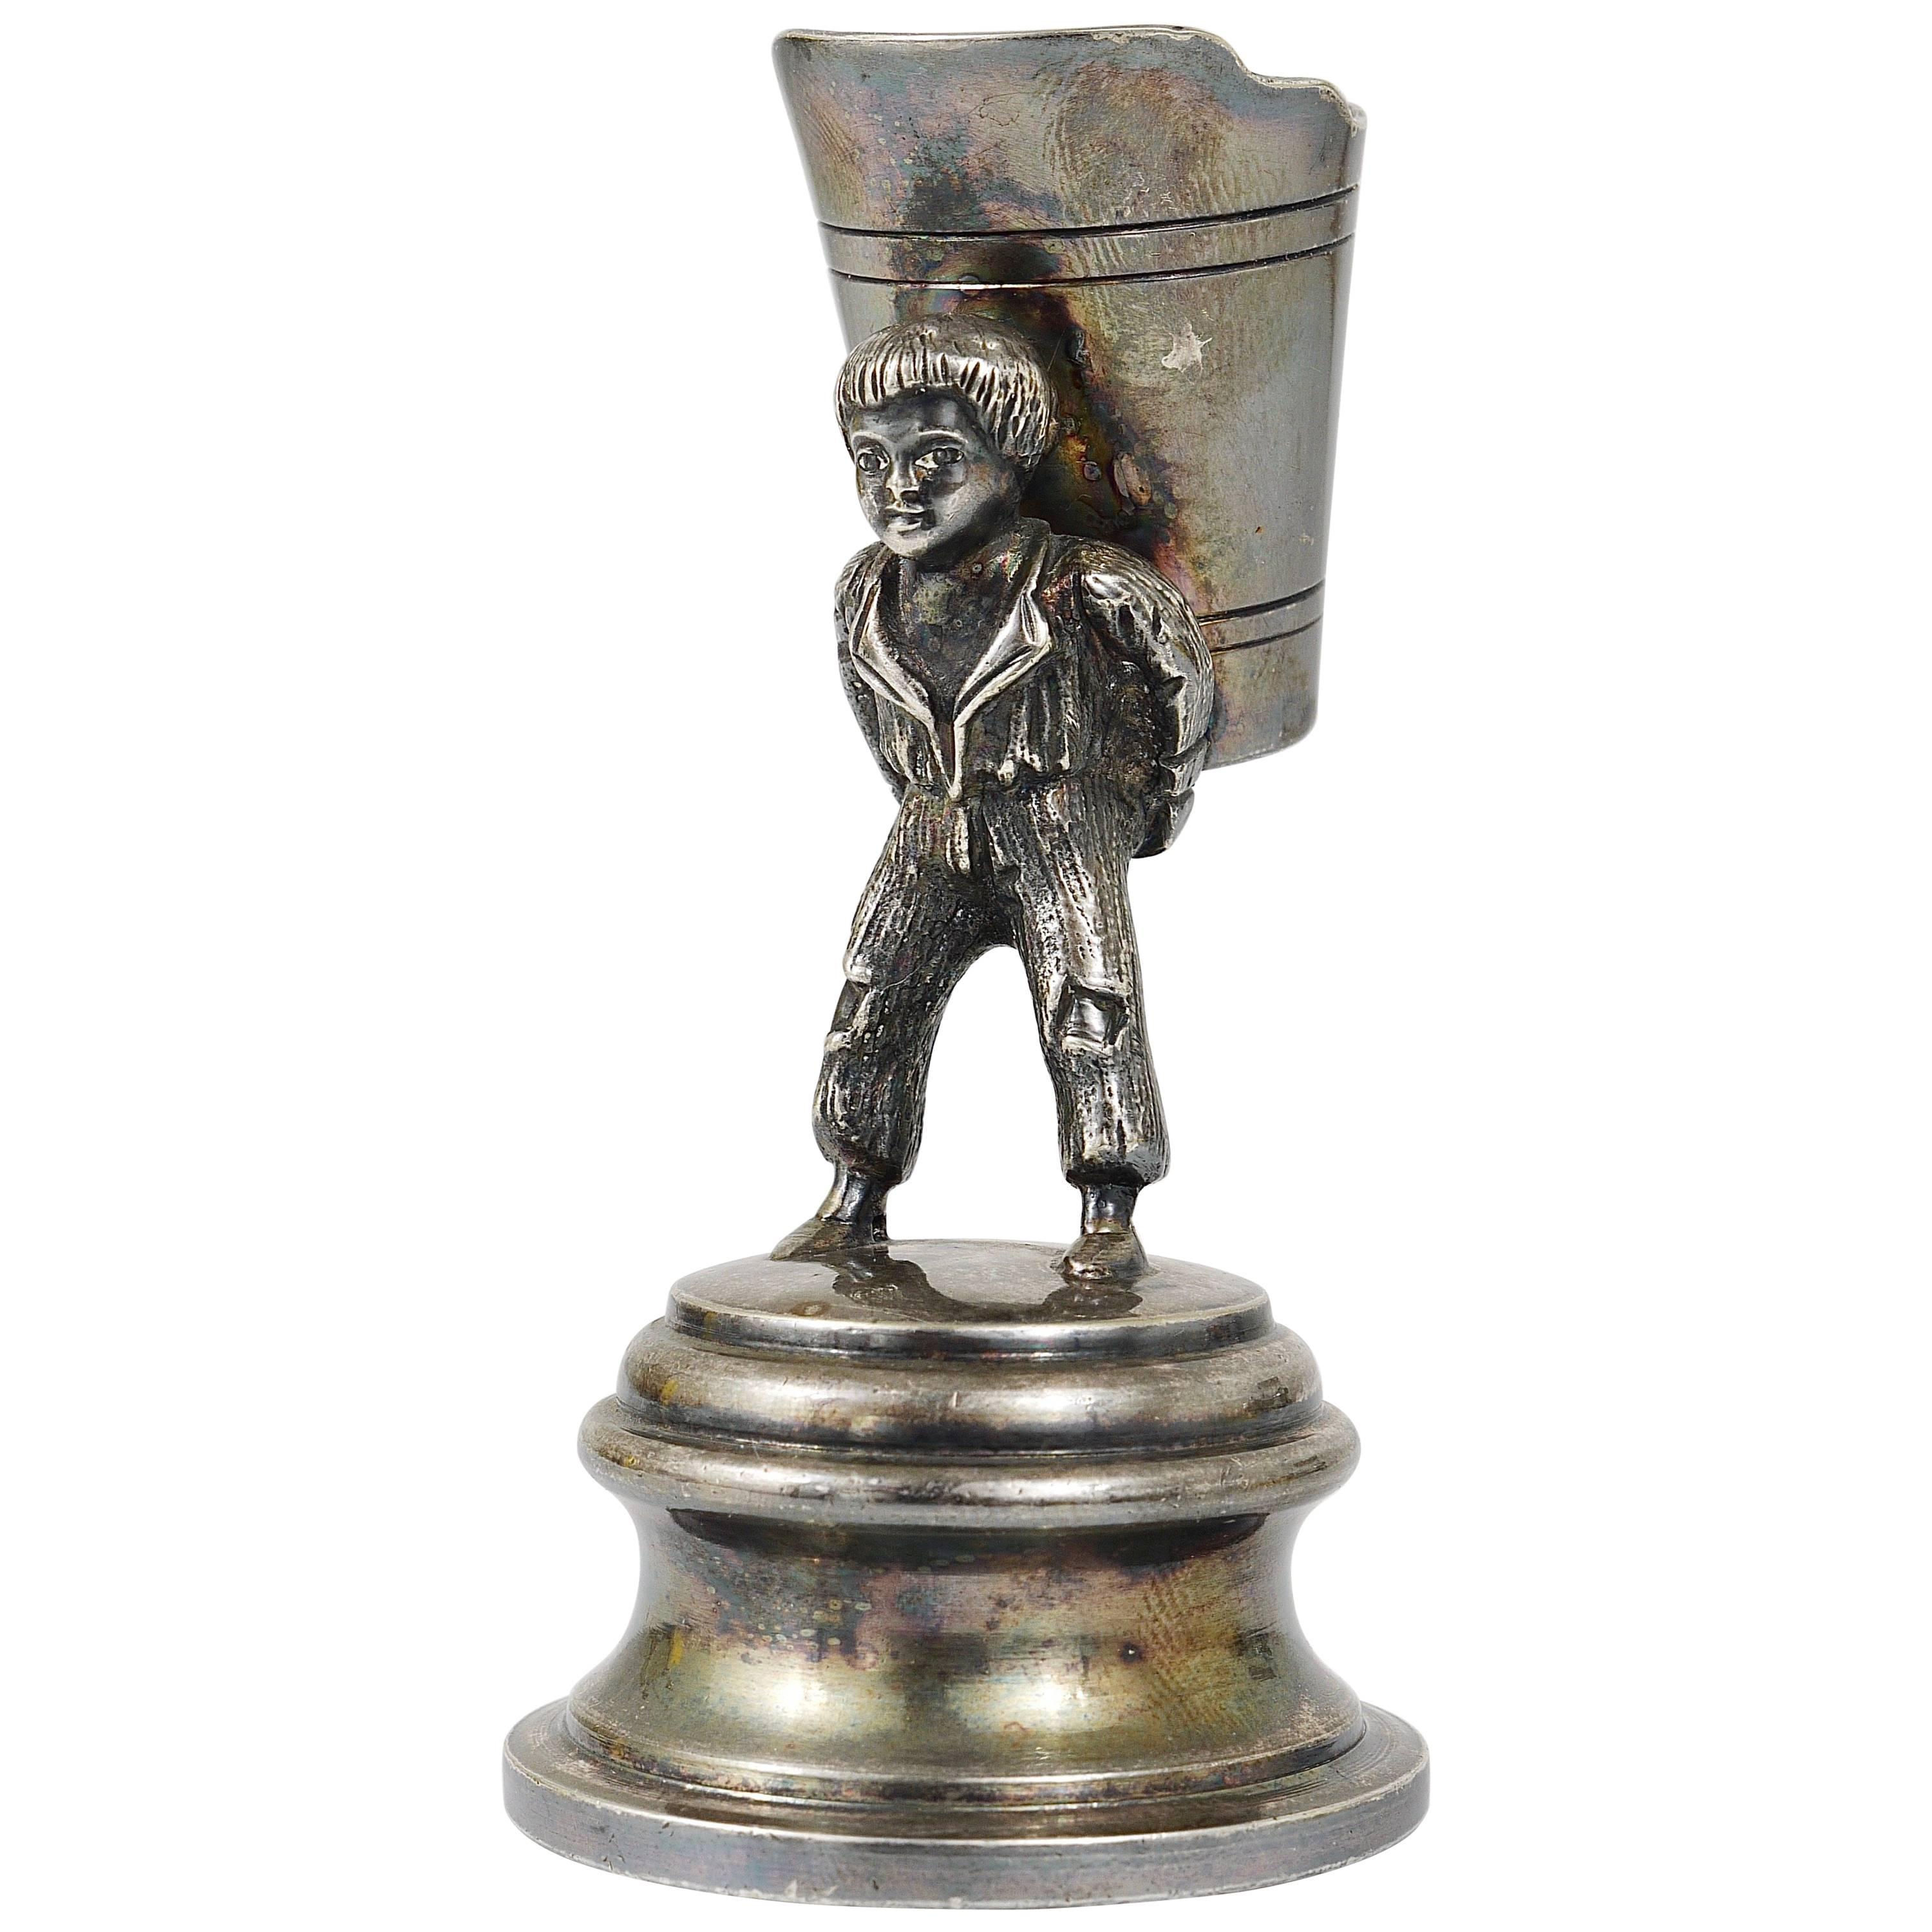 1920s Silver Art Nouveau Toothpick Holder Displaying a Boy at Grape Harvest